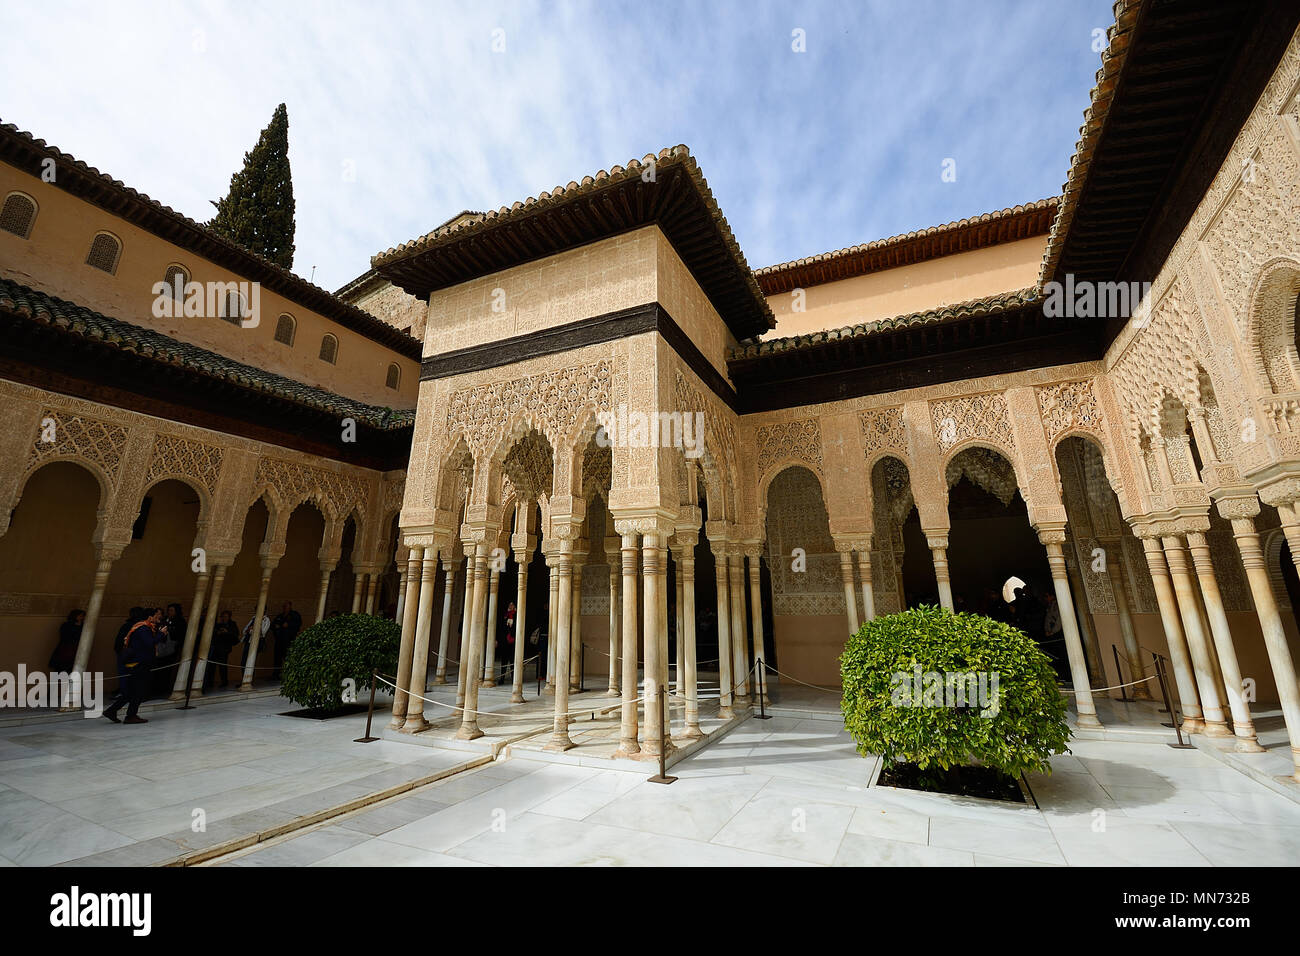 Courtyard of the Lions (El Patio de los Leones) in the Alhambra a moorish  mosque, palace and fortress complex in Granada, Spain Stock Photo - Alamy